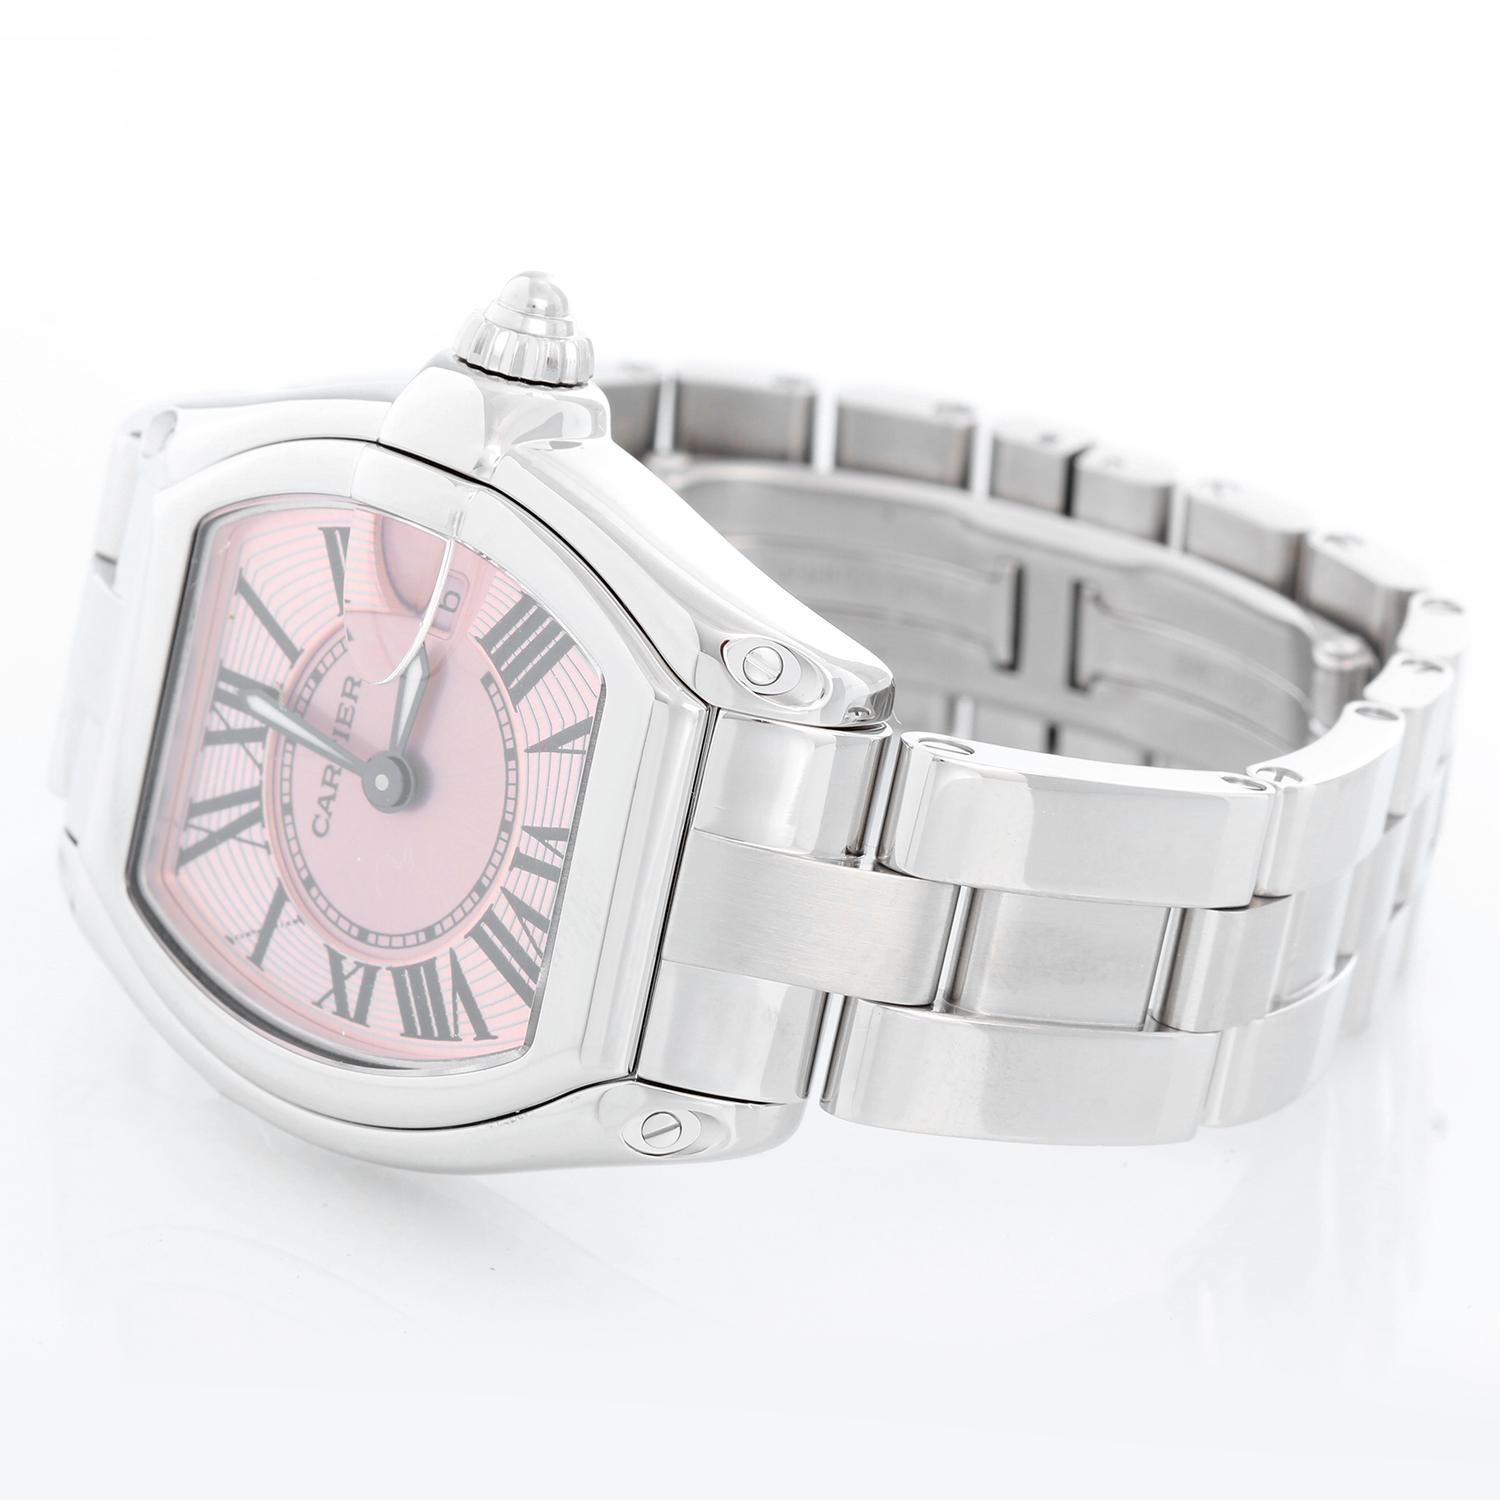 Cartier Roadster Stainless Steel Ladies Watch W62016V3 - Quartz. Stainless steel tonneau style case ( 30 x 36 mm ) . Pink guilloche dial with black Roman numerals; date at 3 o'clock. Stainless steel Cartier bracelet with deployant clasp. Pre-owned